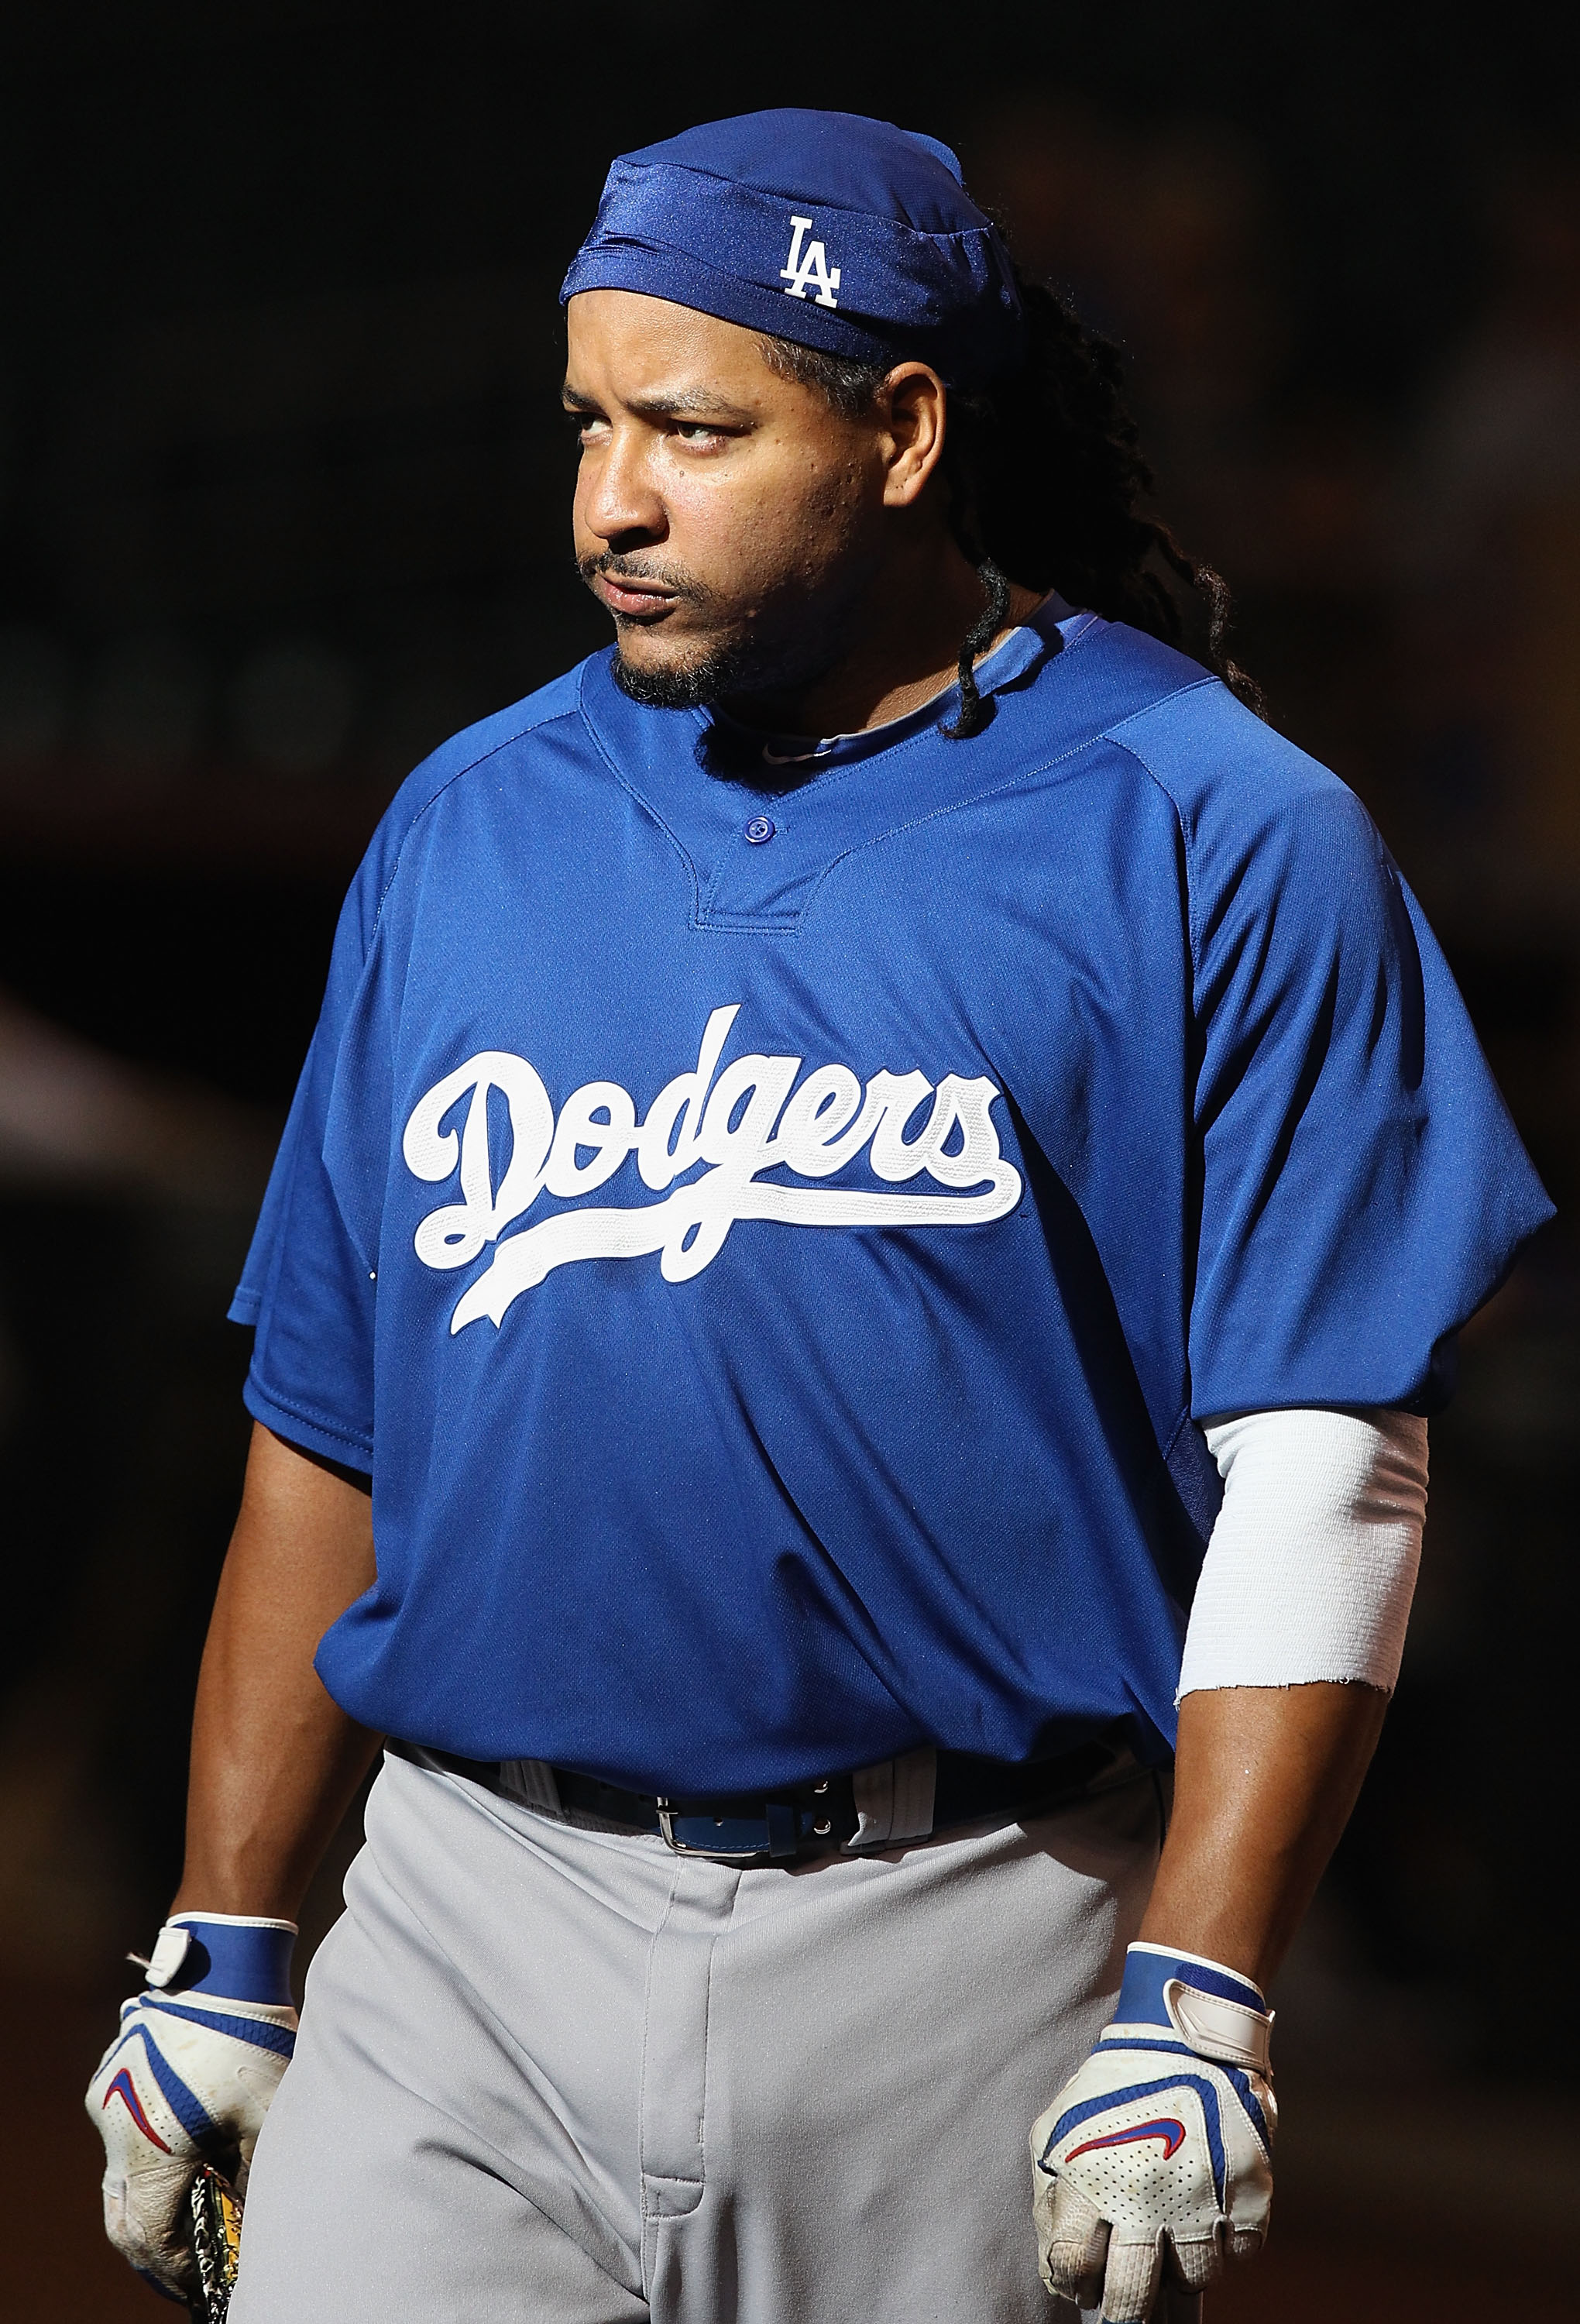 Manny Ramirez Retires and 7 Great Hitters with Ruined Reputations